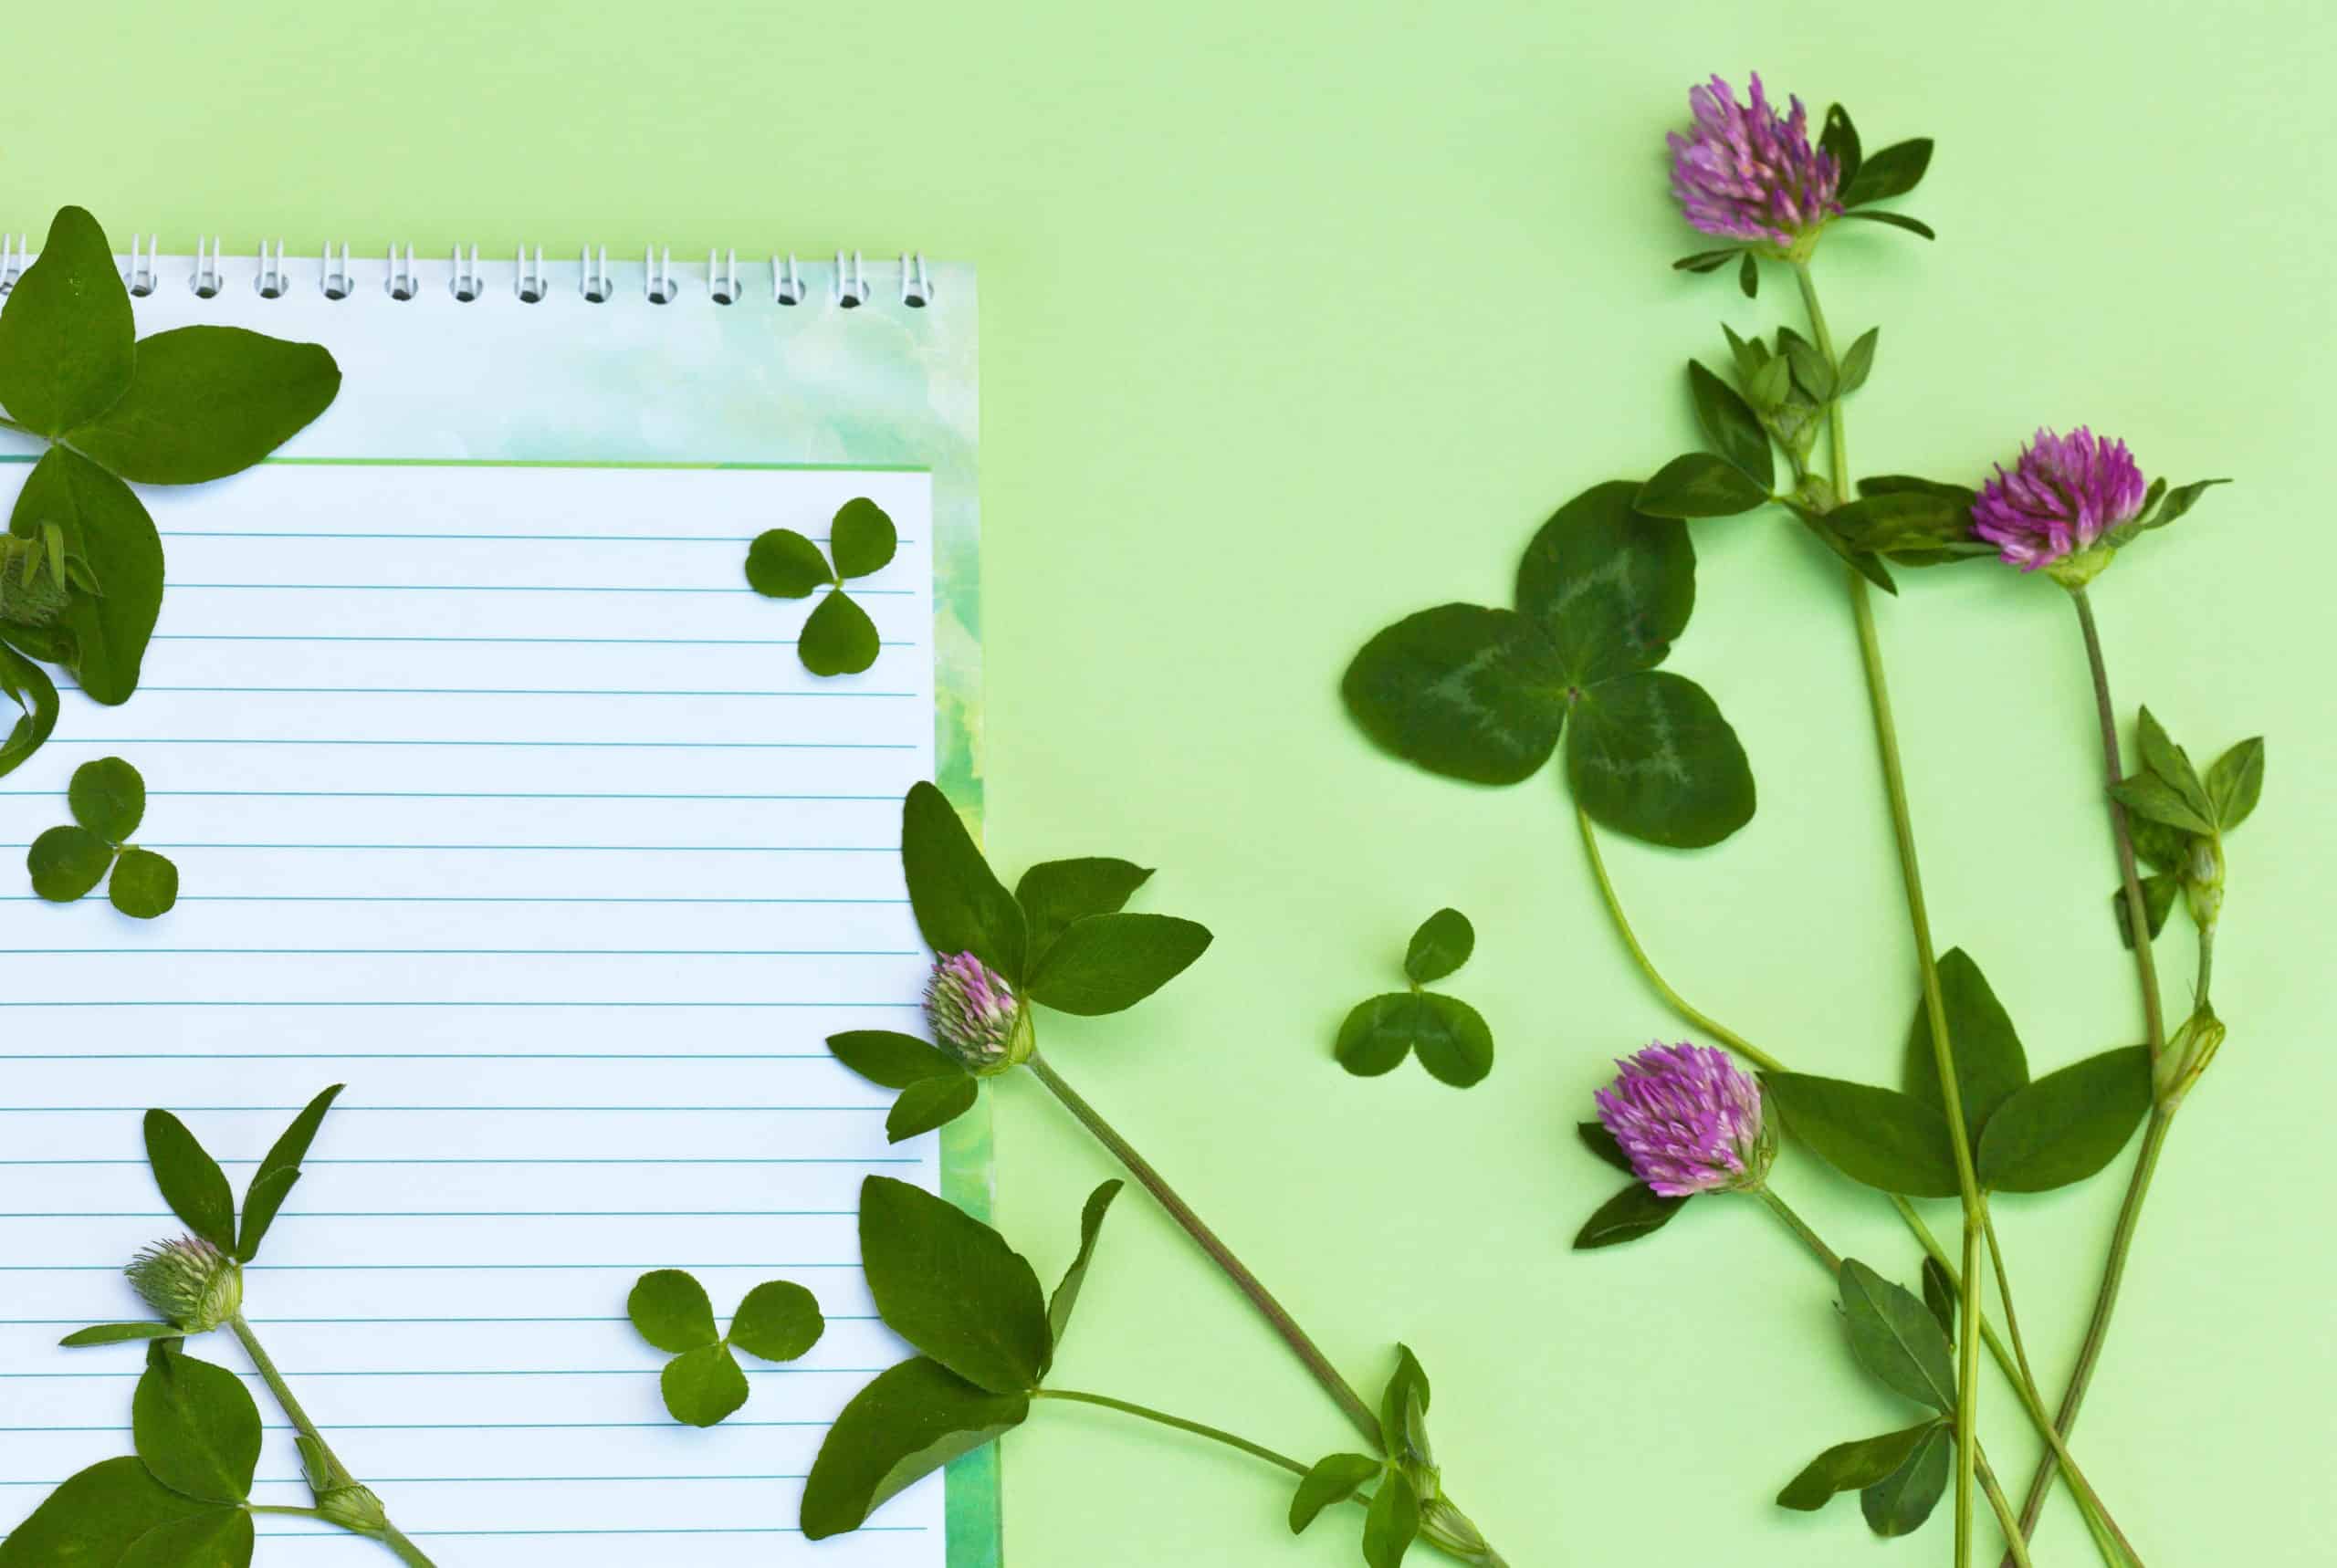 Flowers of three-leaf clover and notepad on a light green background.